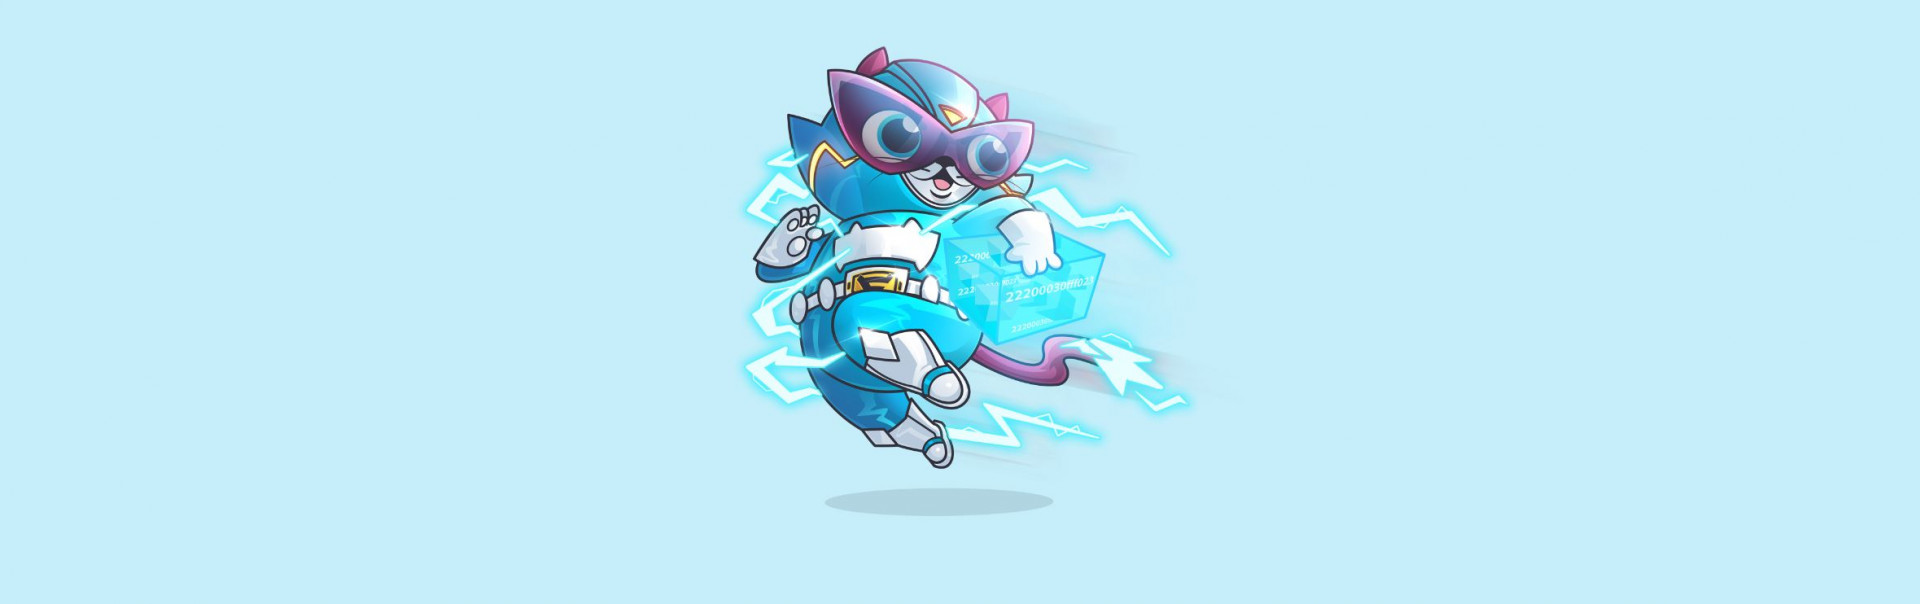 A digital cartoon of a blue cat in a superhero costume, wreathed in lightning bolts, against a pale blue background